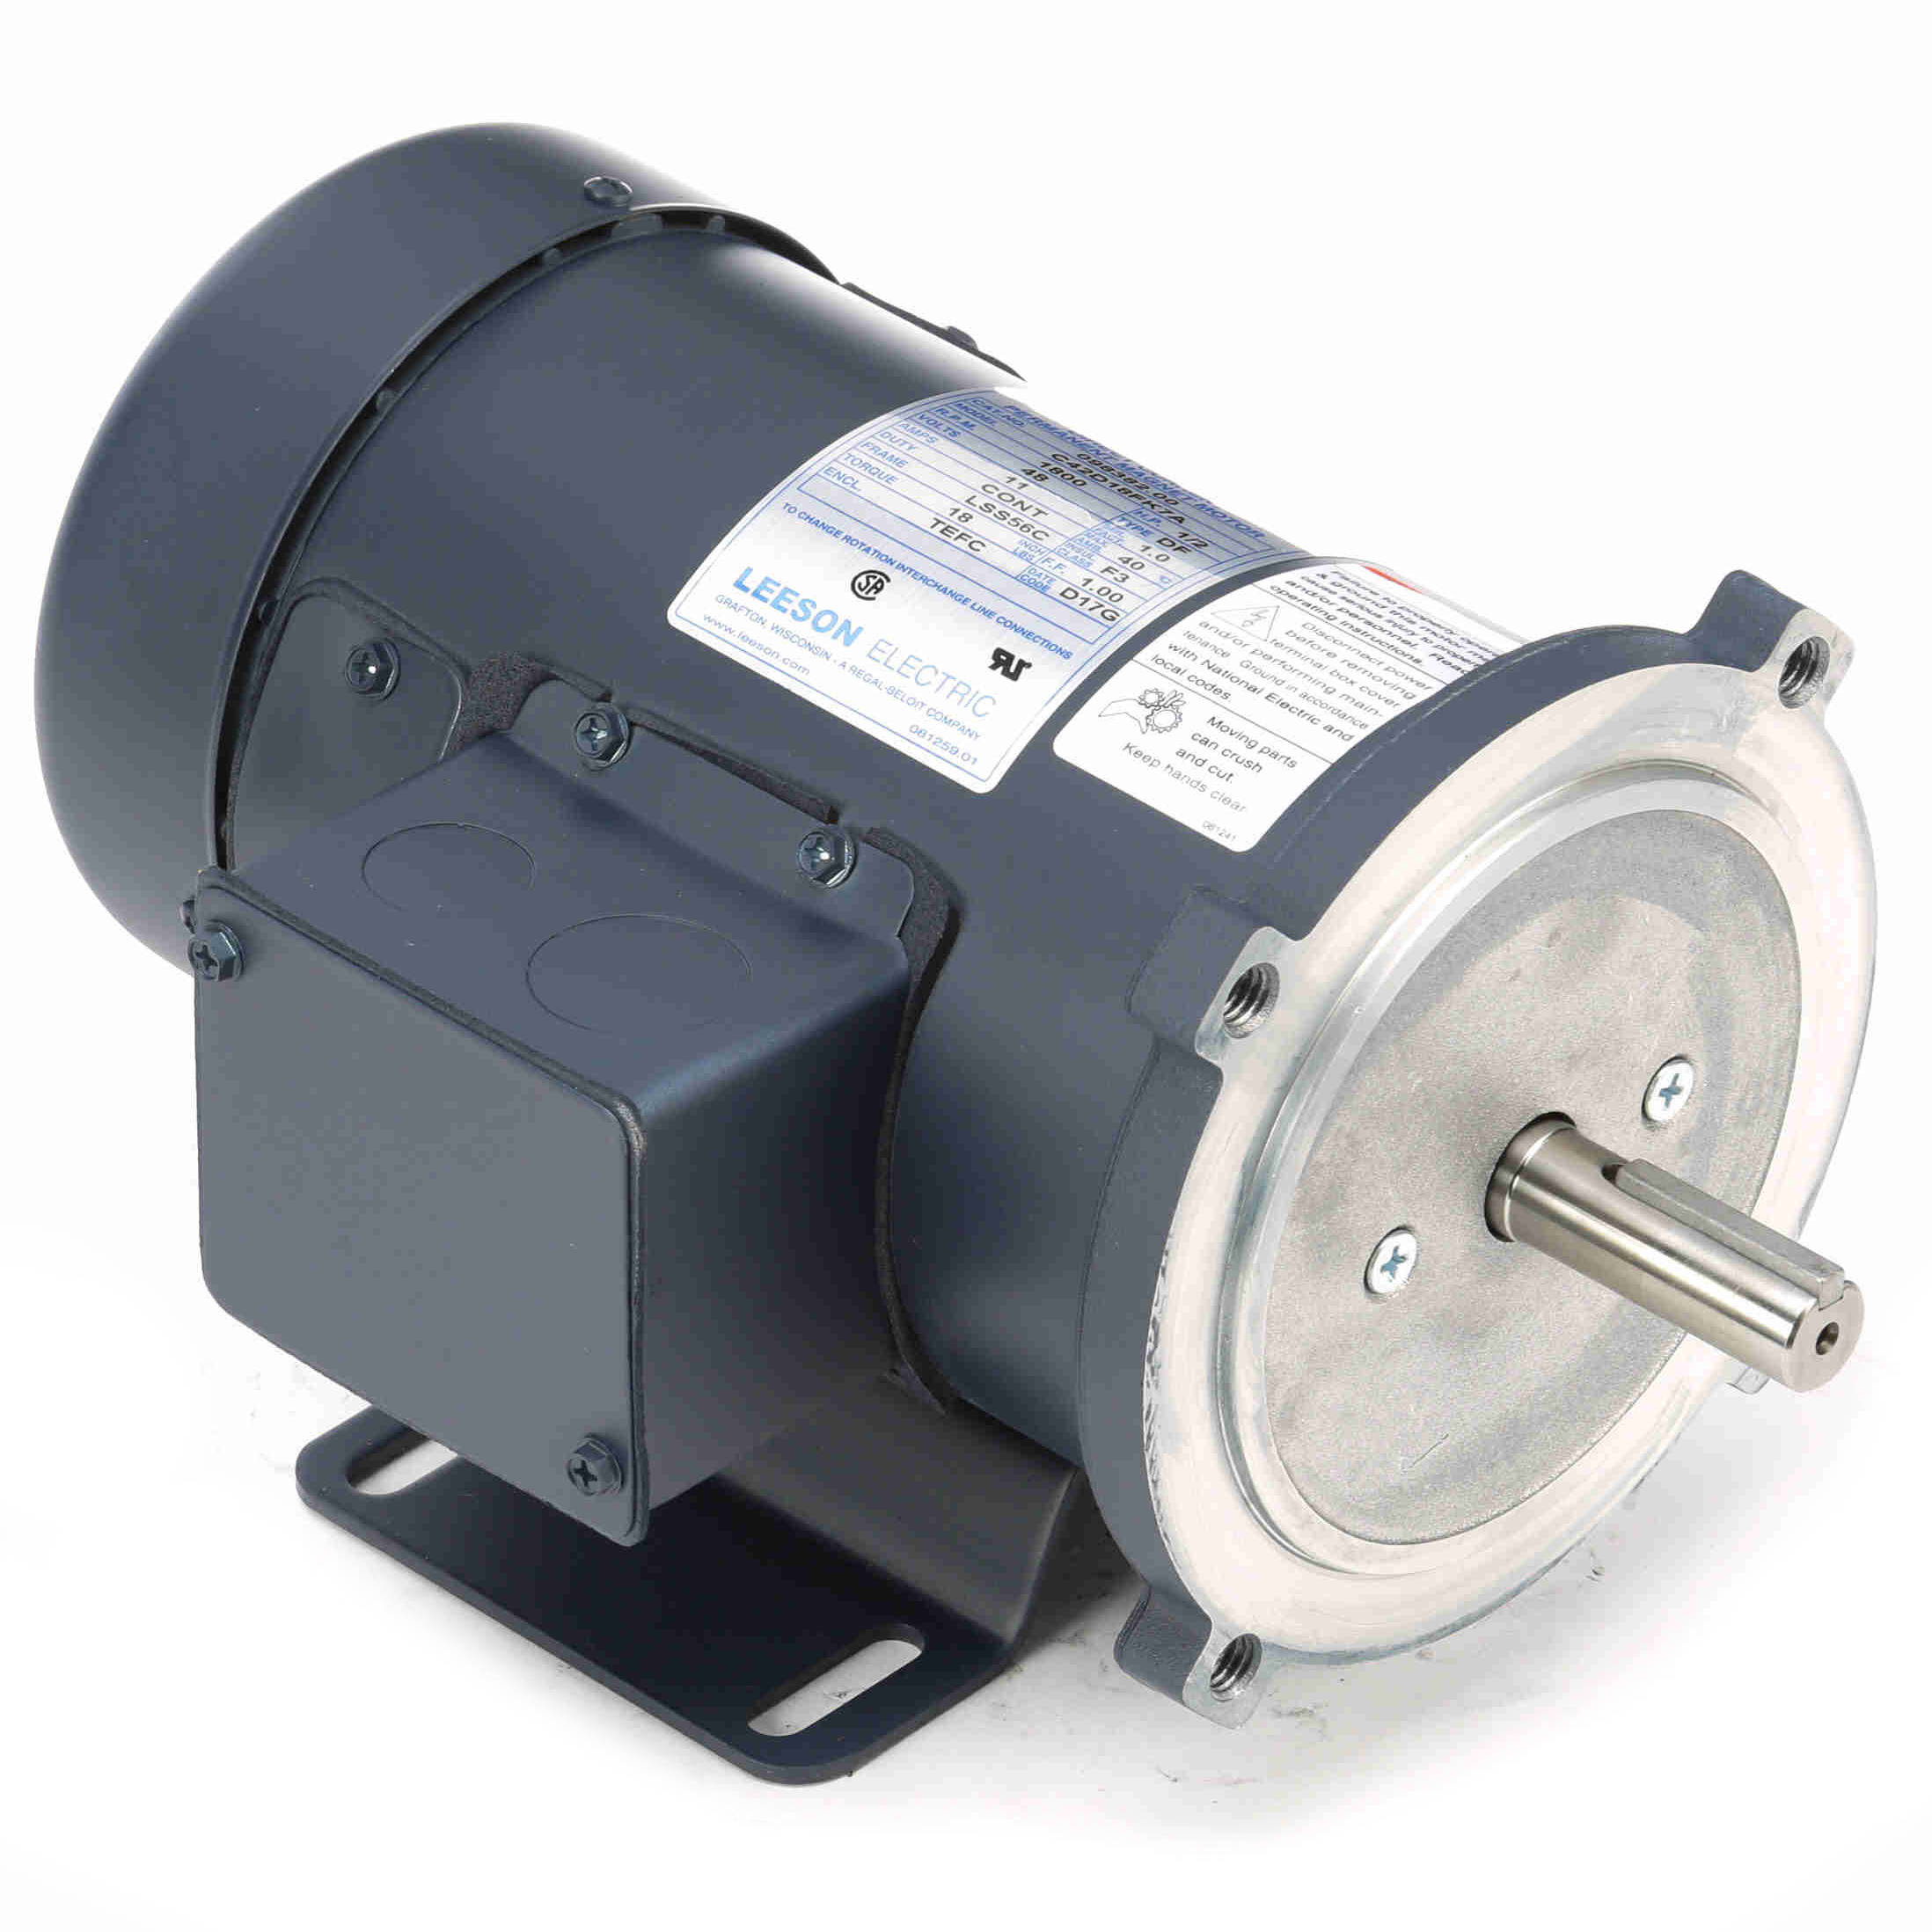 098382.00 Leeson 1/2HP Low Voltage DC Electric Motor, 1800RPM 1